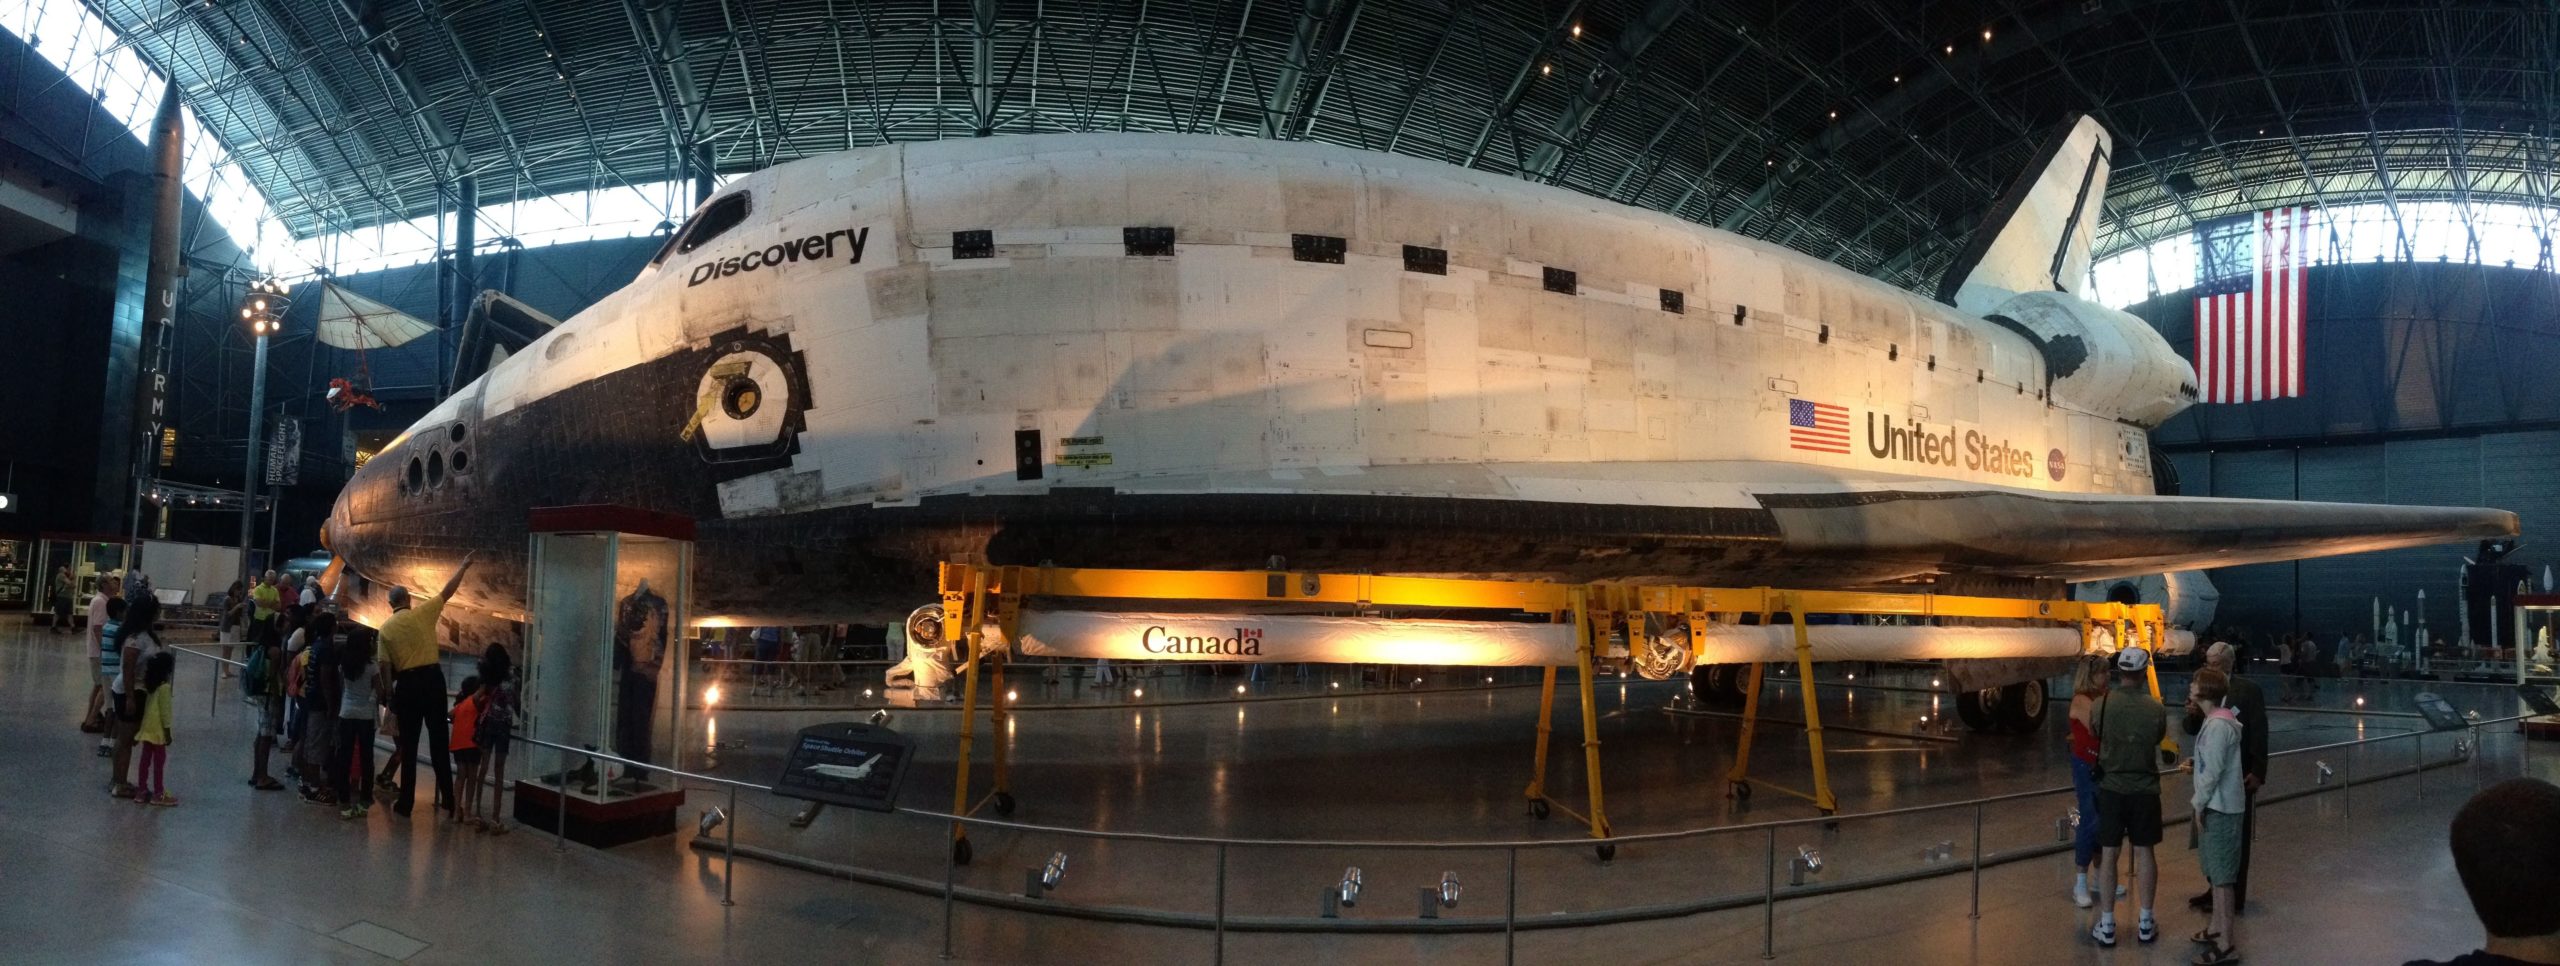 The Space Shuttle Discovery on display at the National Air and Space Museum Steven F. Udvar-Hazy Centre in Chantilly, Virginia. (Photo: Andrew Liszewski/Gizmodo)